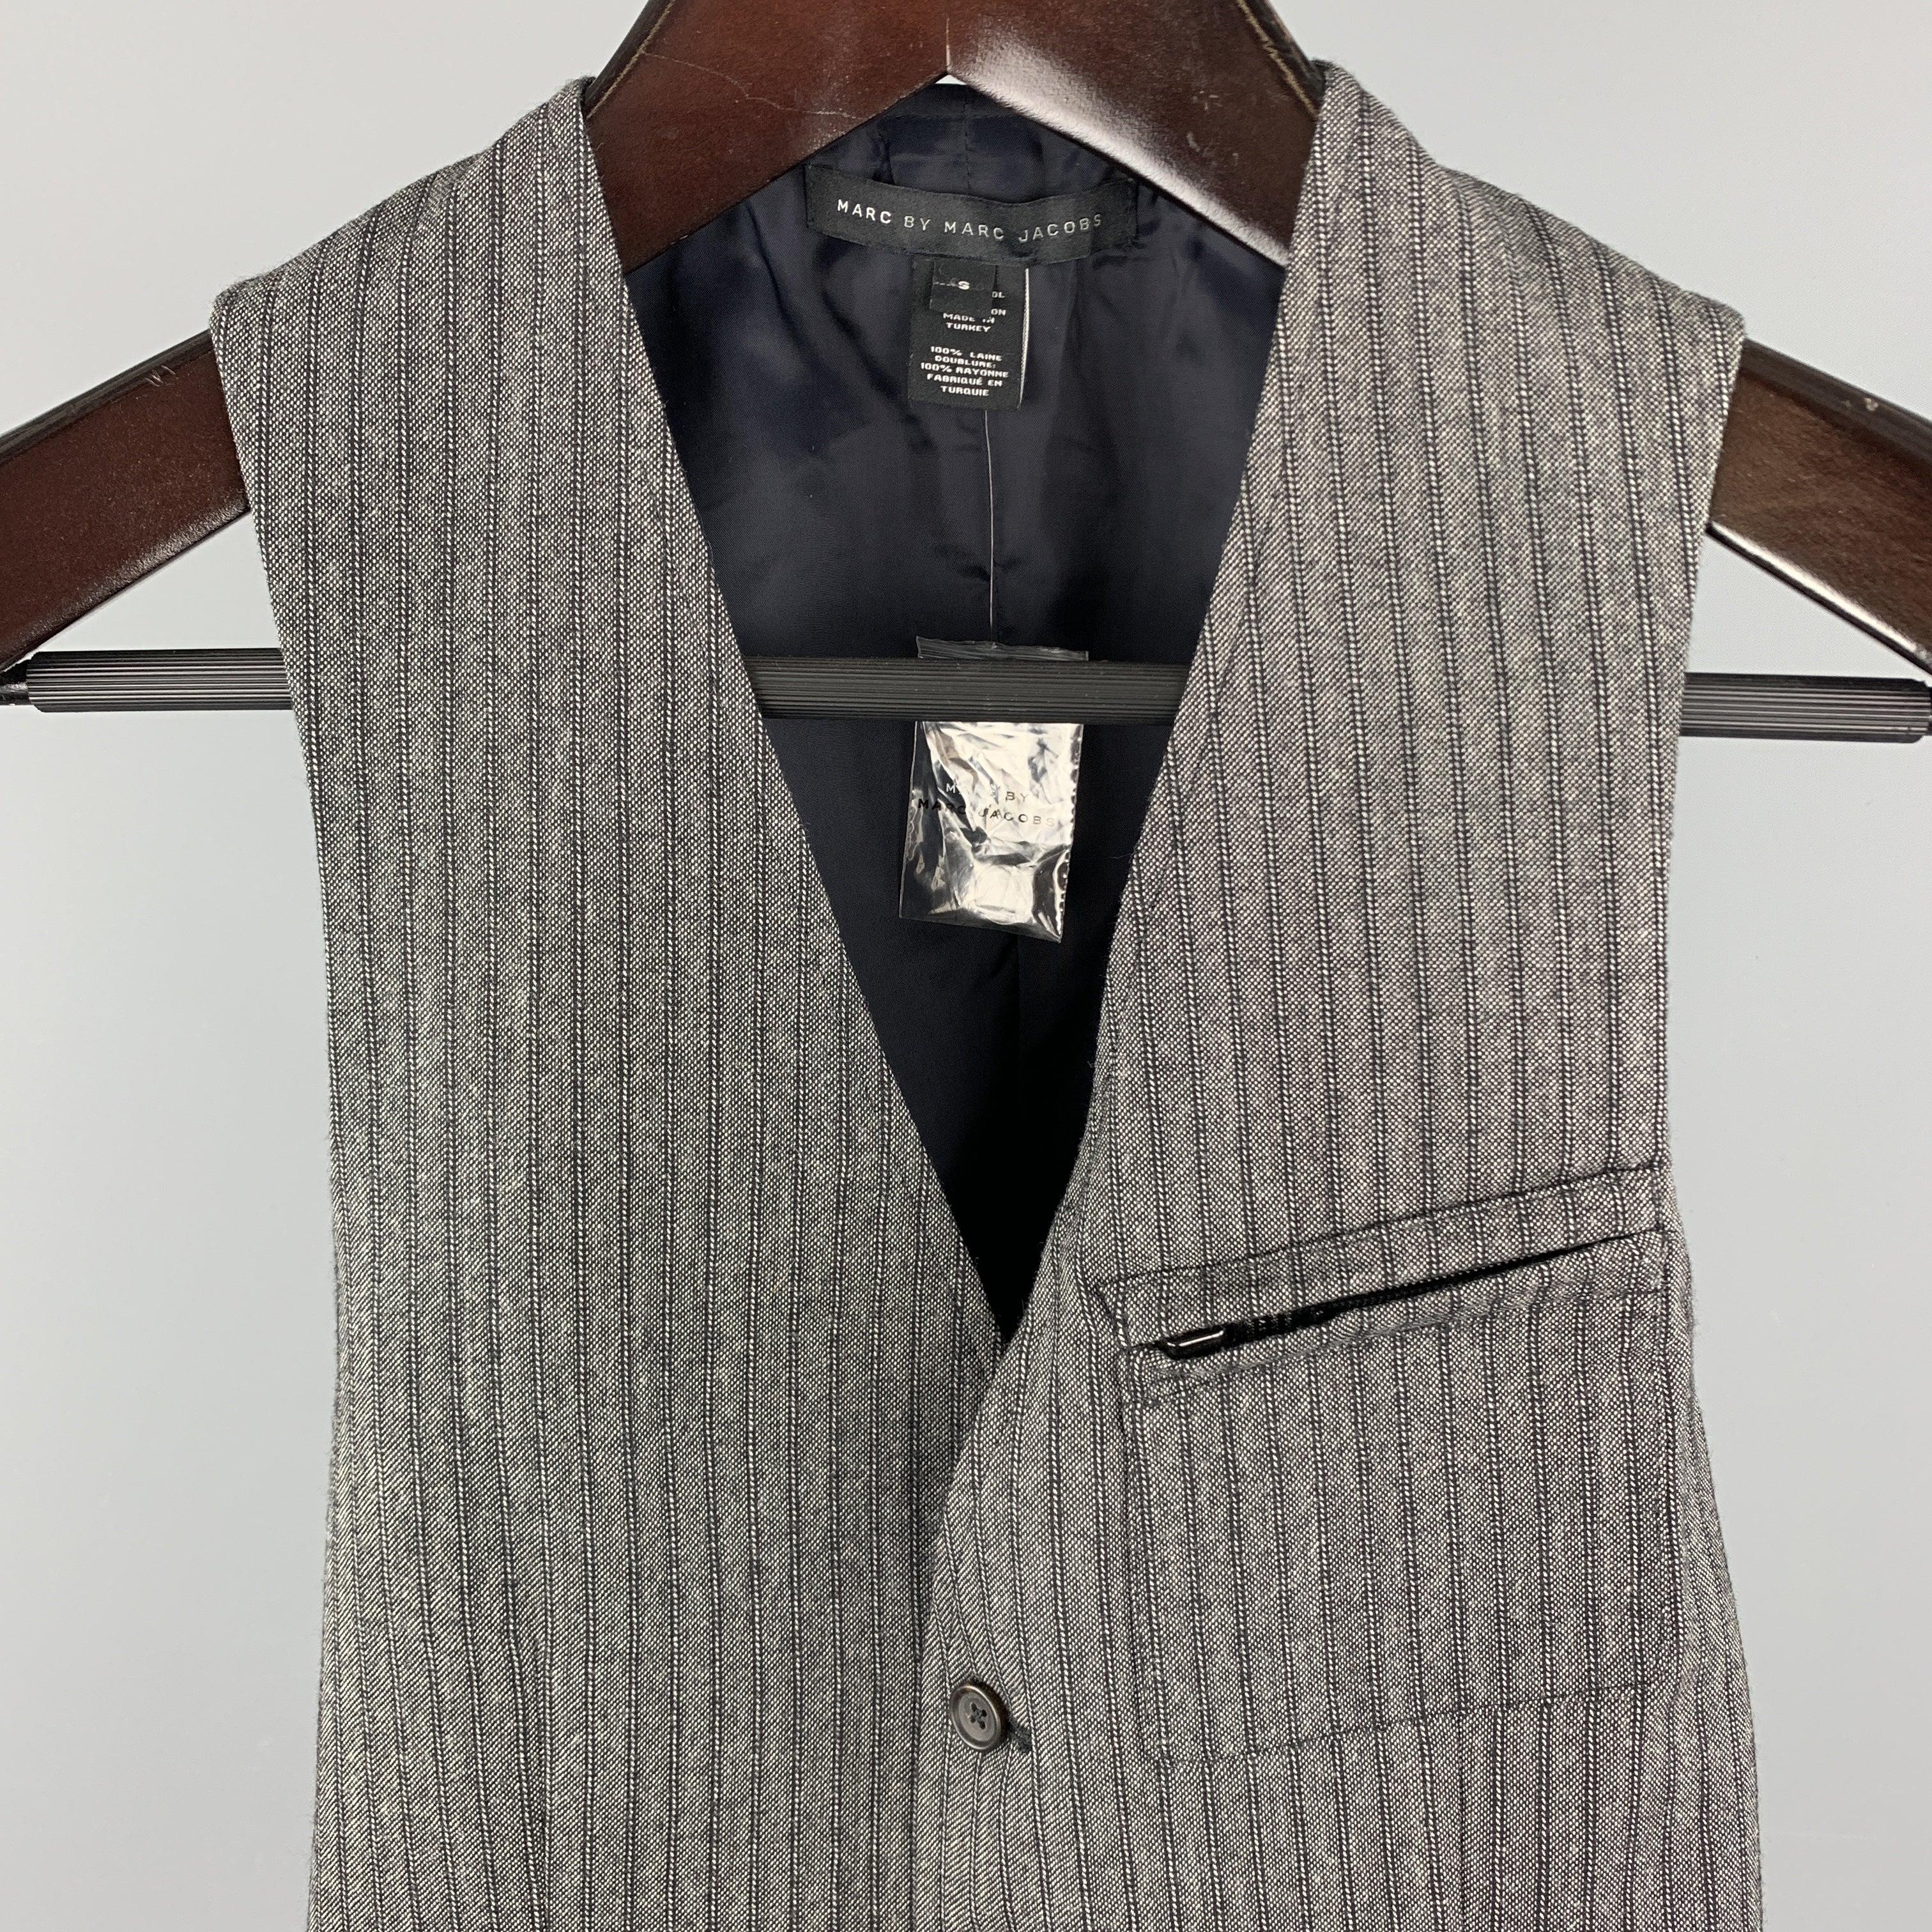 MARC by MARC JACOBS Vest comes in a gray stripe wool material, with a V-neck, a buttoned front, zip and slit pockets, and a striped back.New without Tags. 

Marked:   S 

Measurements: 
 
Shoulder: 11.5 inches 
Chest:
34 inches 
Length:
 24 inches 
